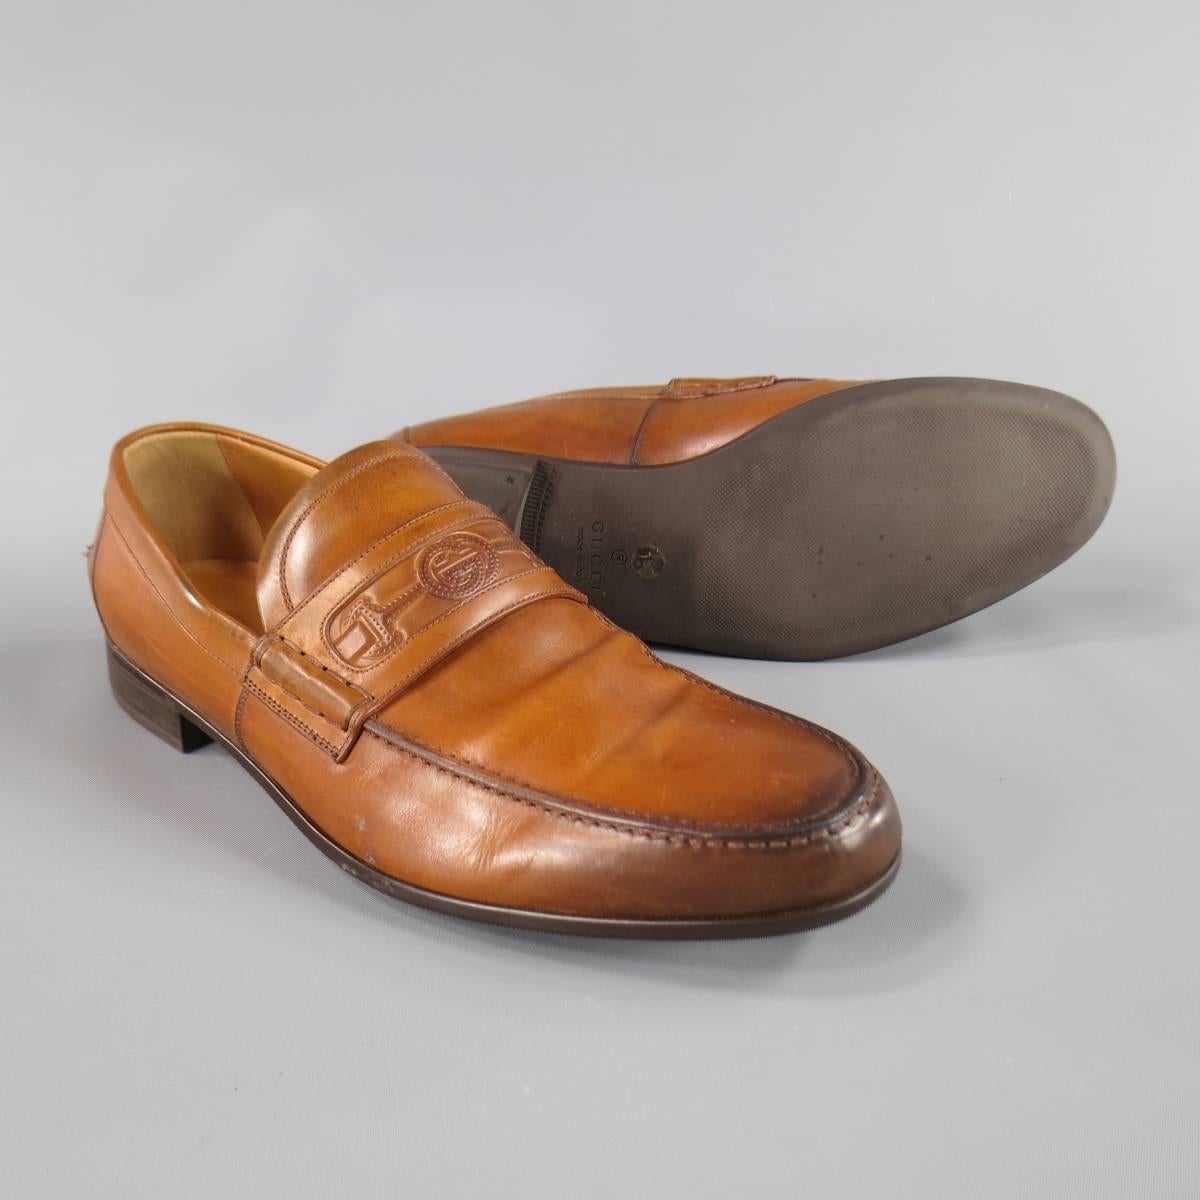 GUCCI Loafer consists of leather material in a tan color tone. Designed in a round, moc toe front, burnish pattern and contrast stitching. Detailed with perforated 